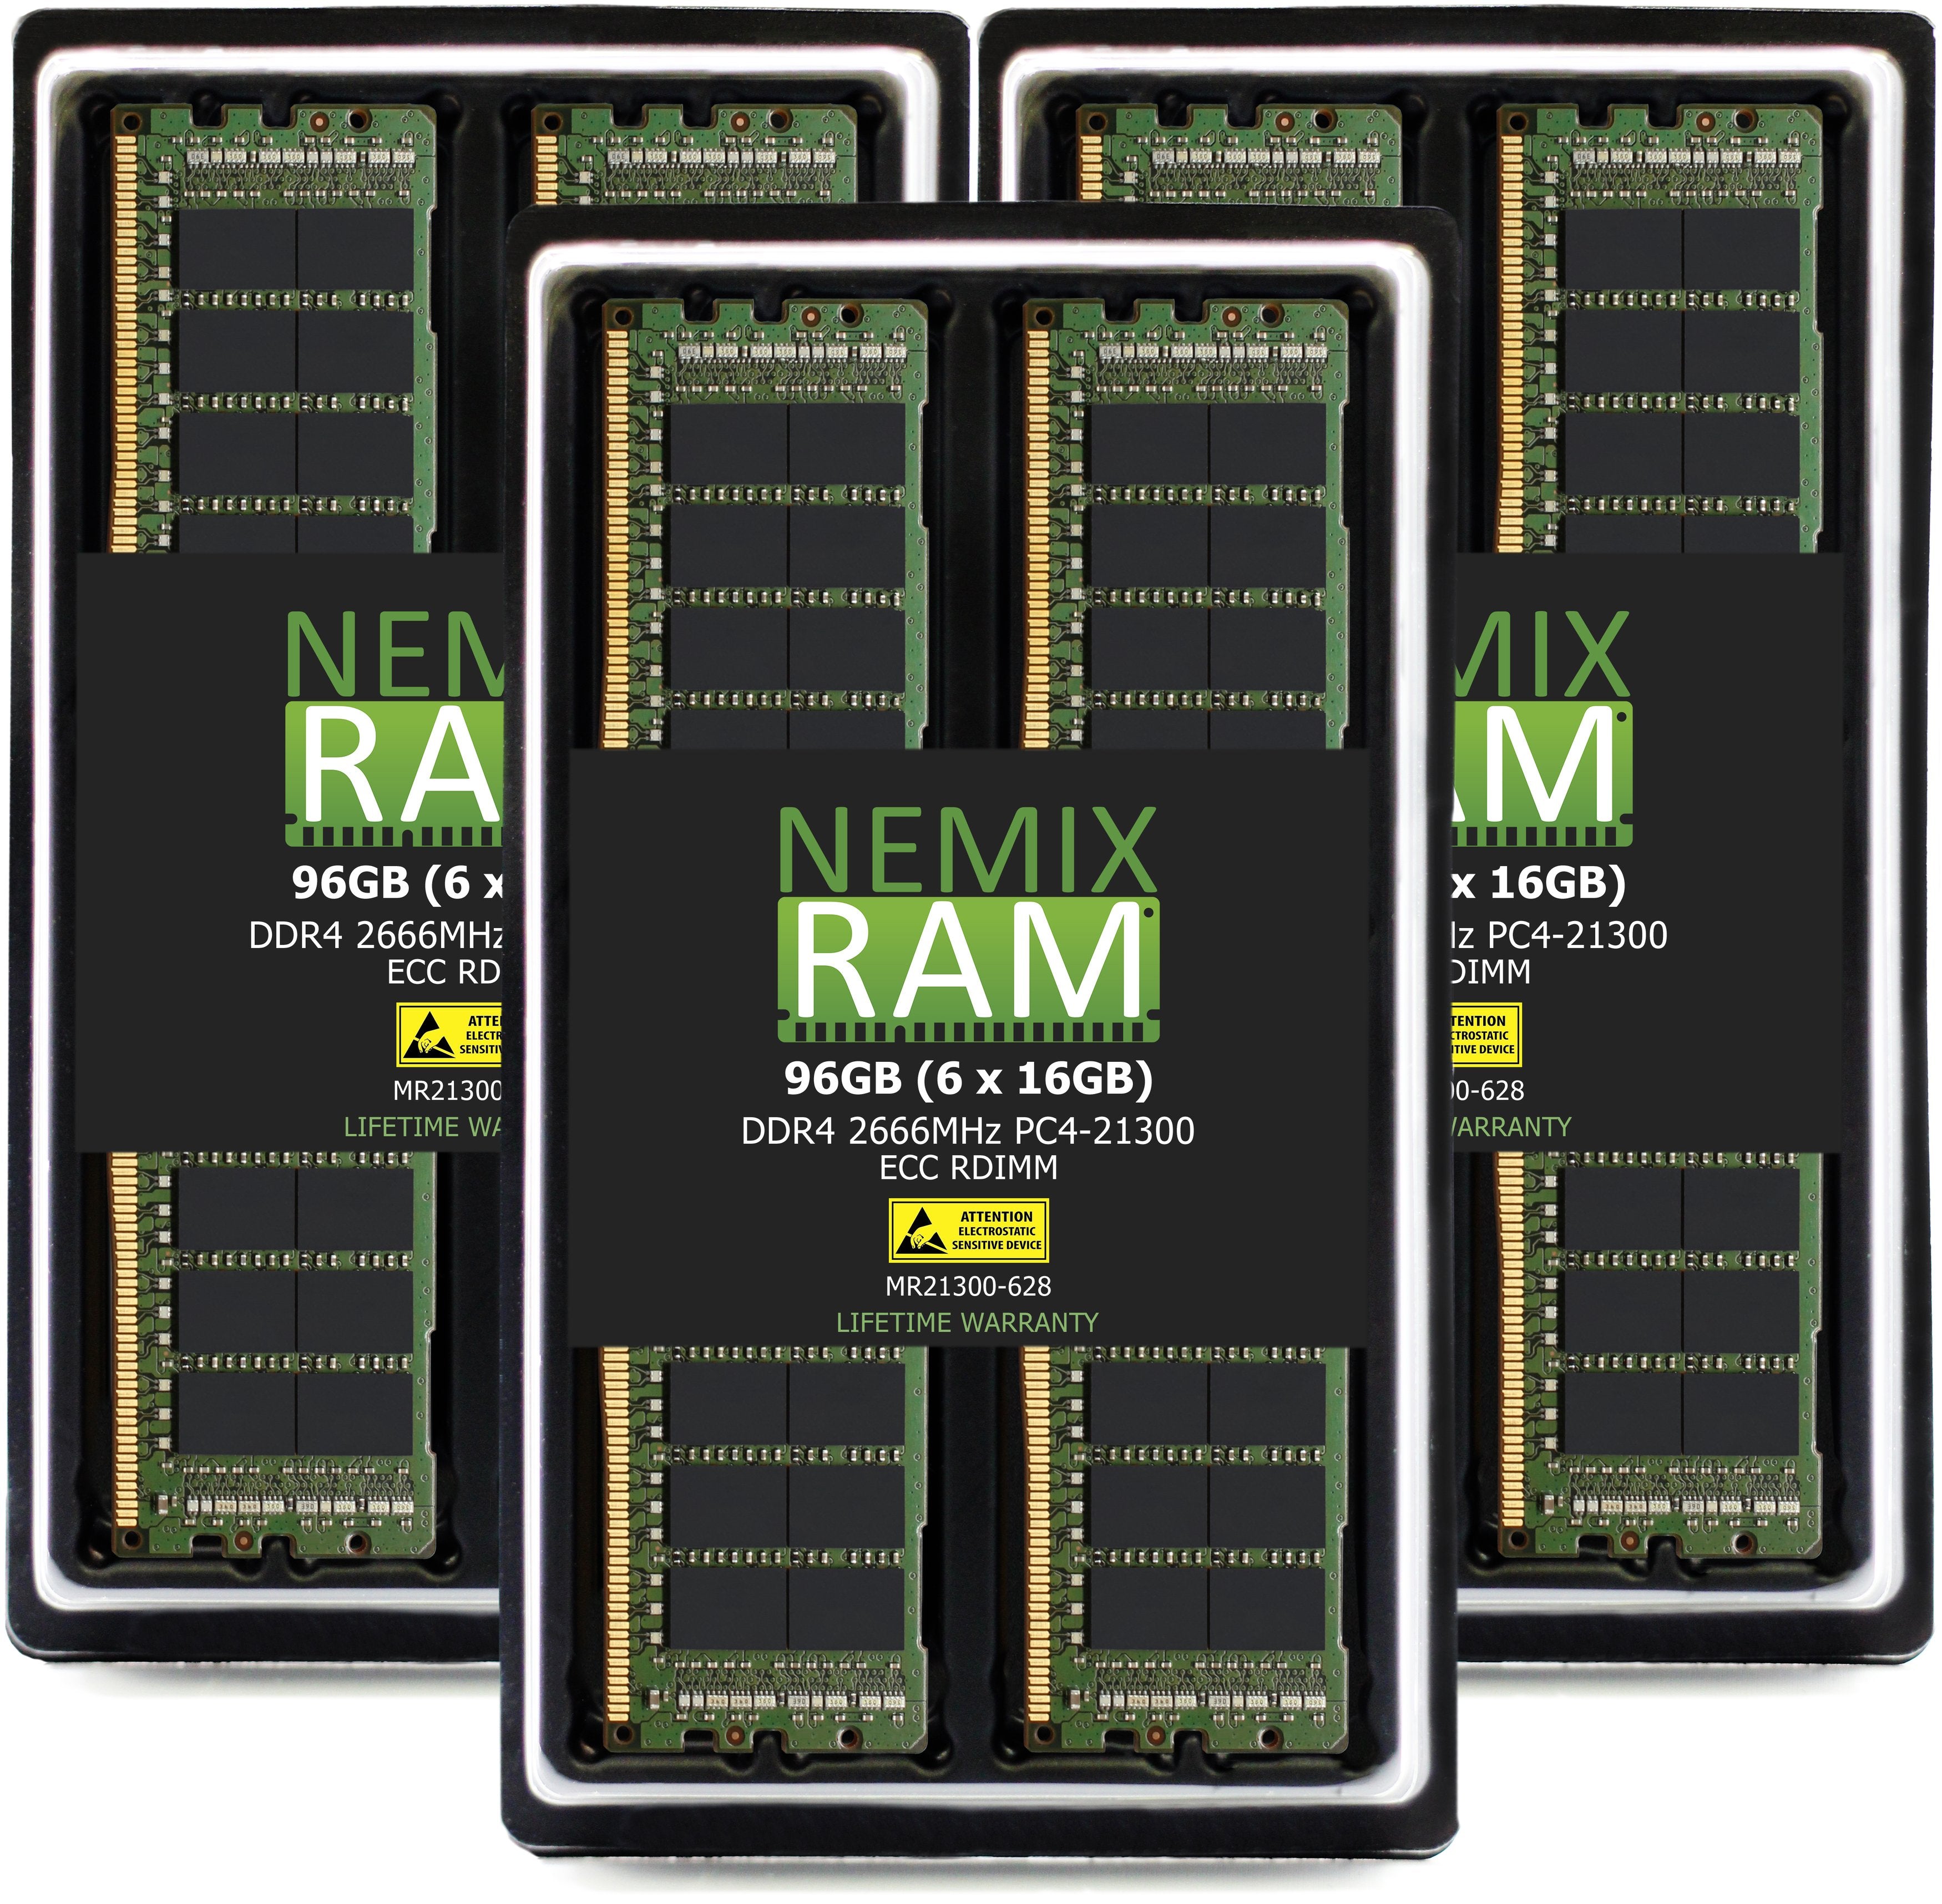 DDR4 2666MHZ PC4-21300 RDIMM for Apple Mac Pro 2019 7,1 8-core